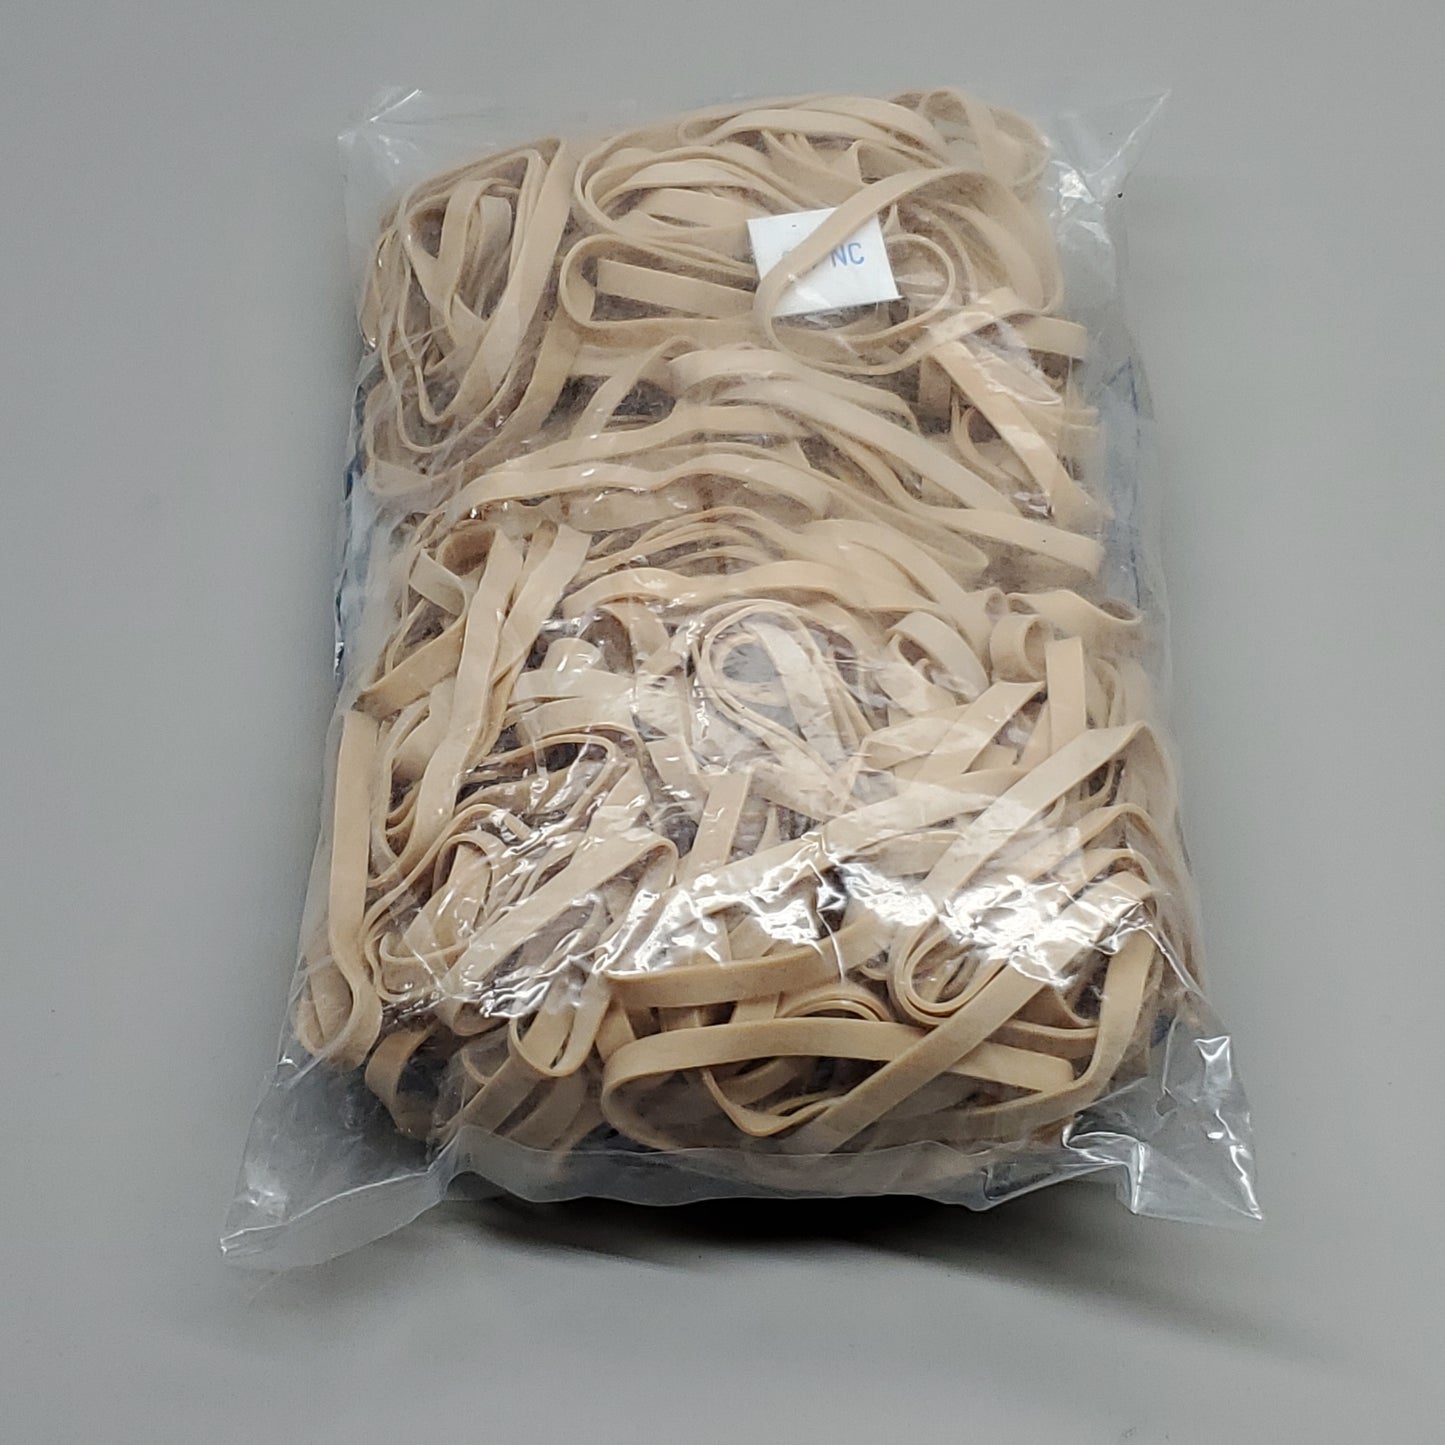 ANCHOR PACKAGING CO The Beacon Line Rubber Bands 1 lb Size 64 (New)